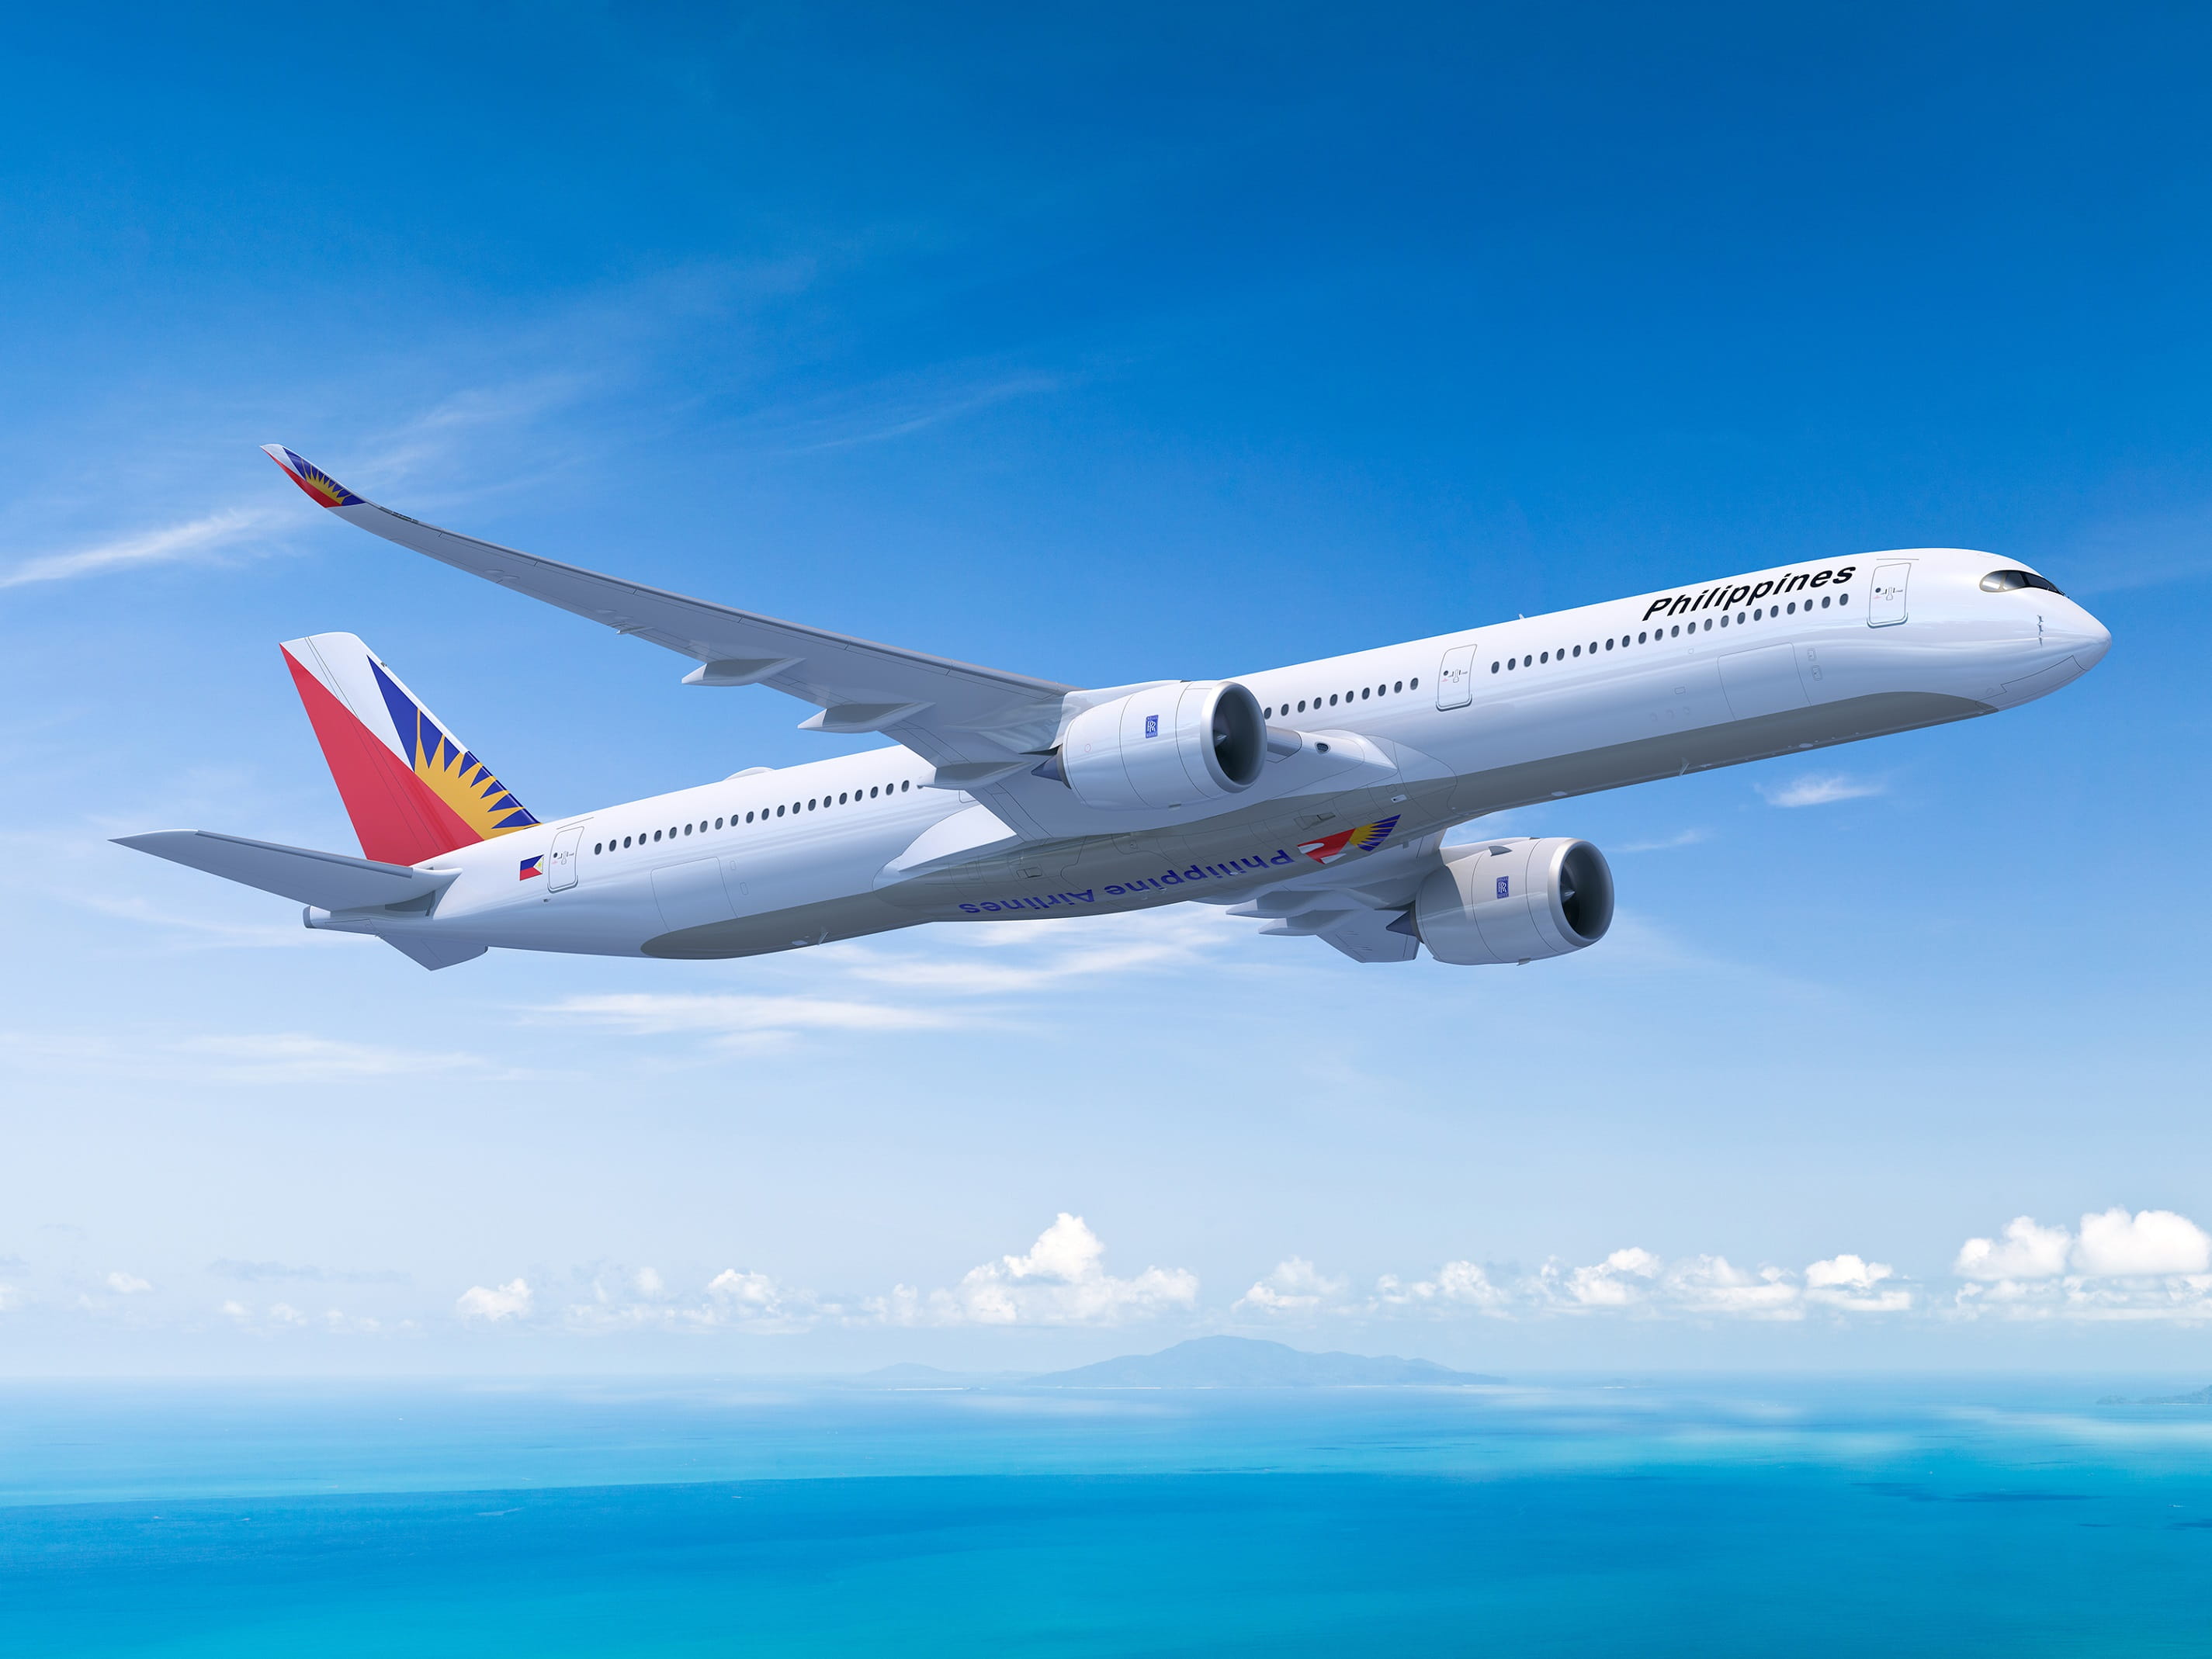 Philippine Airlines looks to holiday season with cheer; reports high on-time performance in August